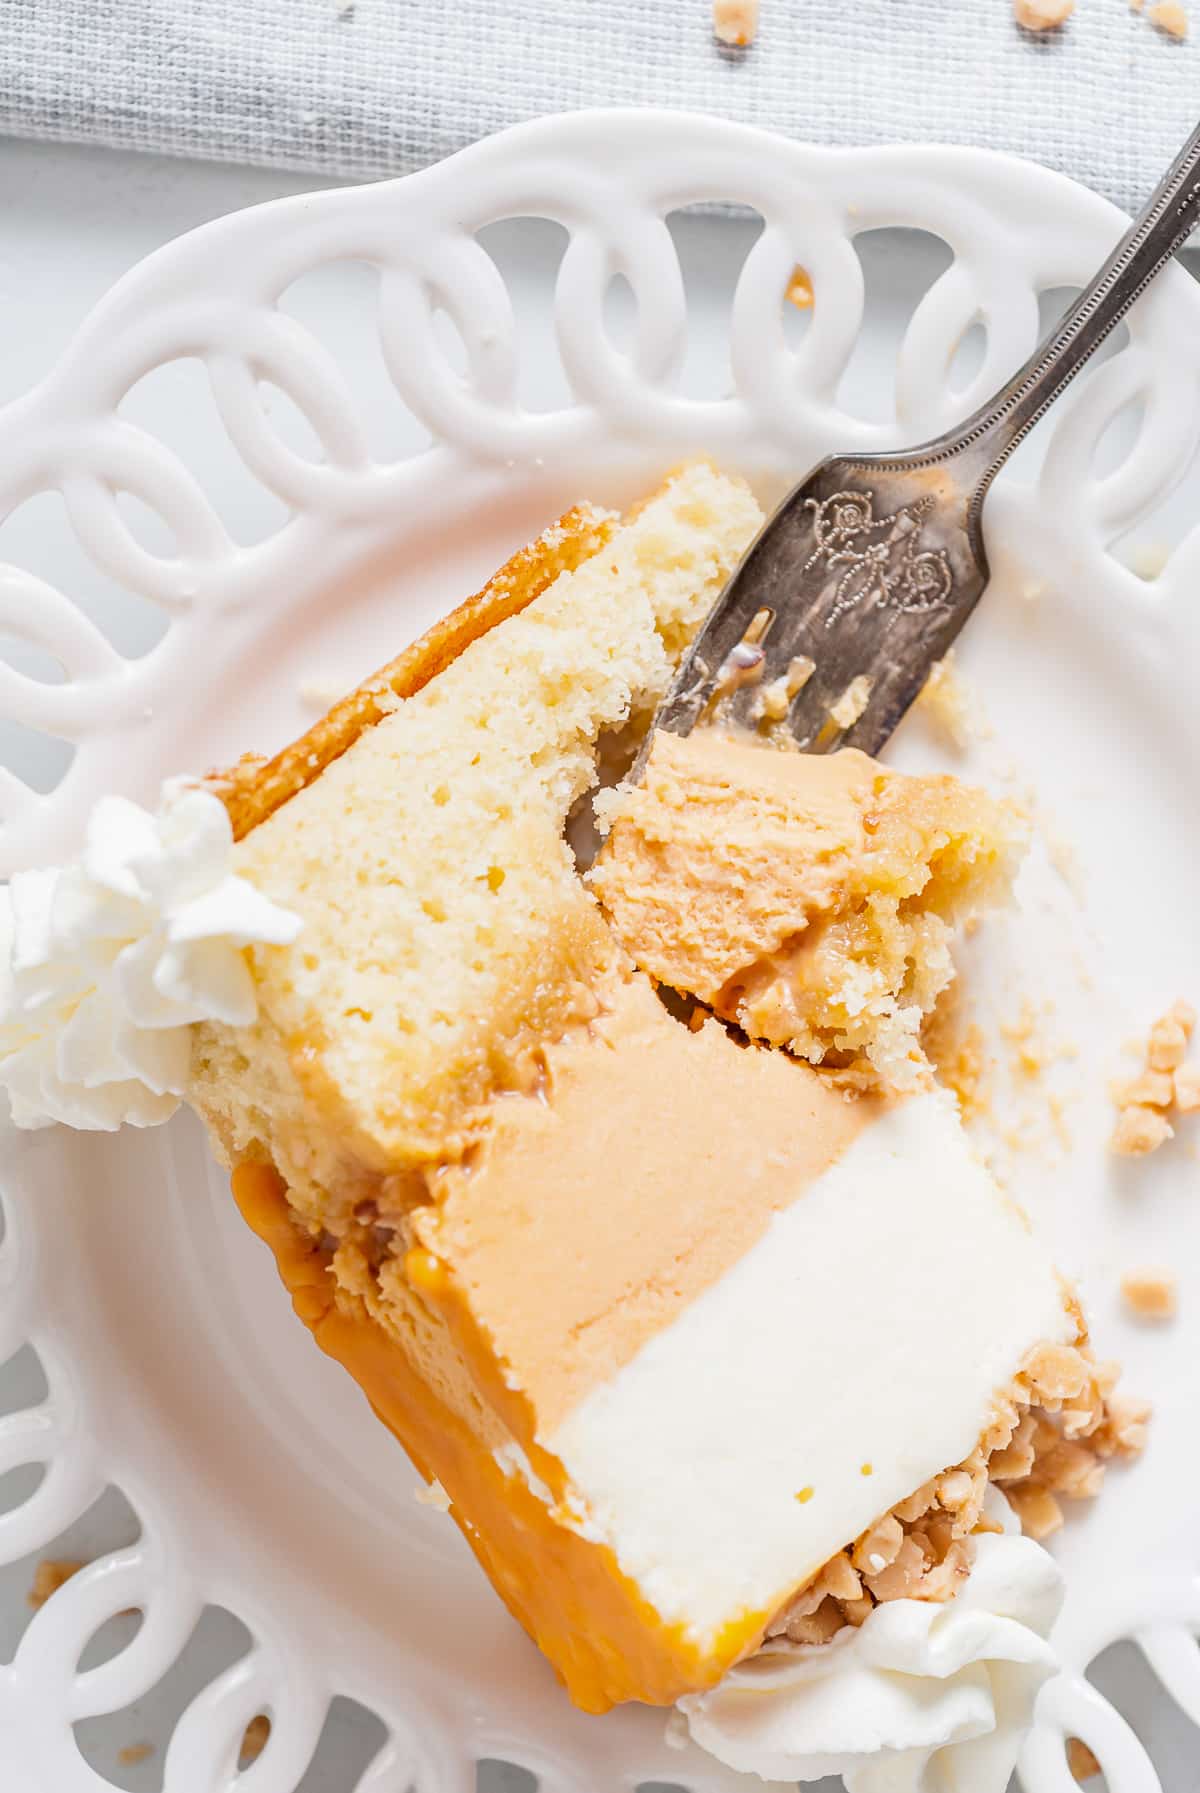 A silver fork taking out a bite of white chocolate mousse cake on a white plate